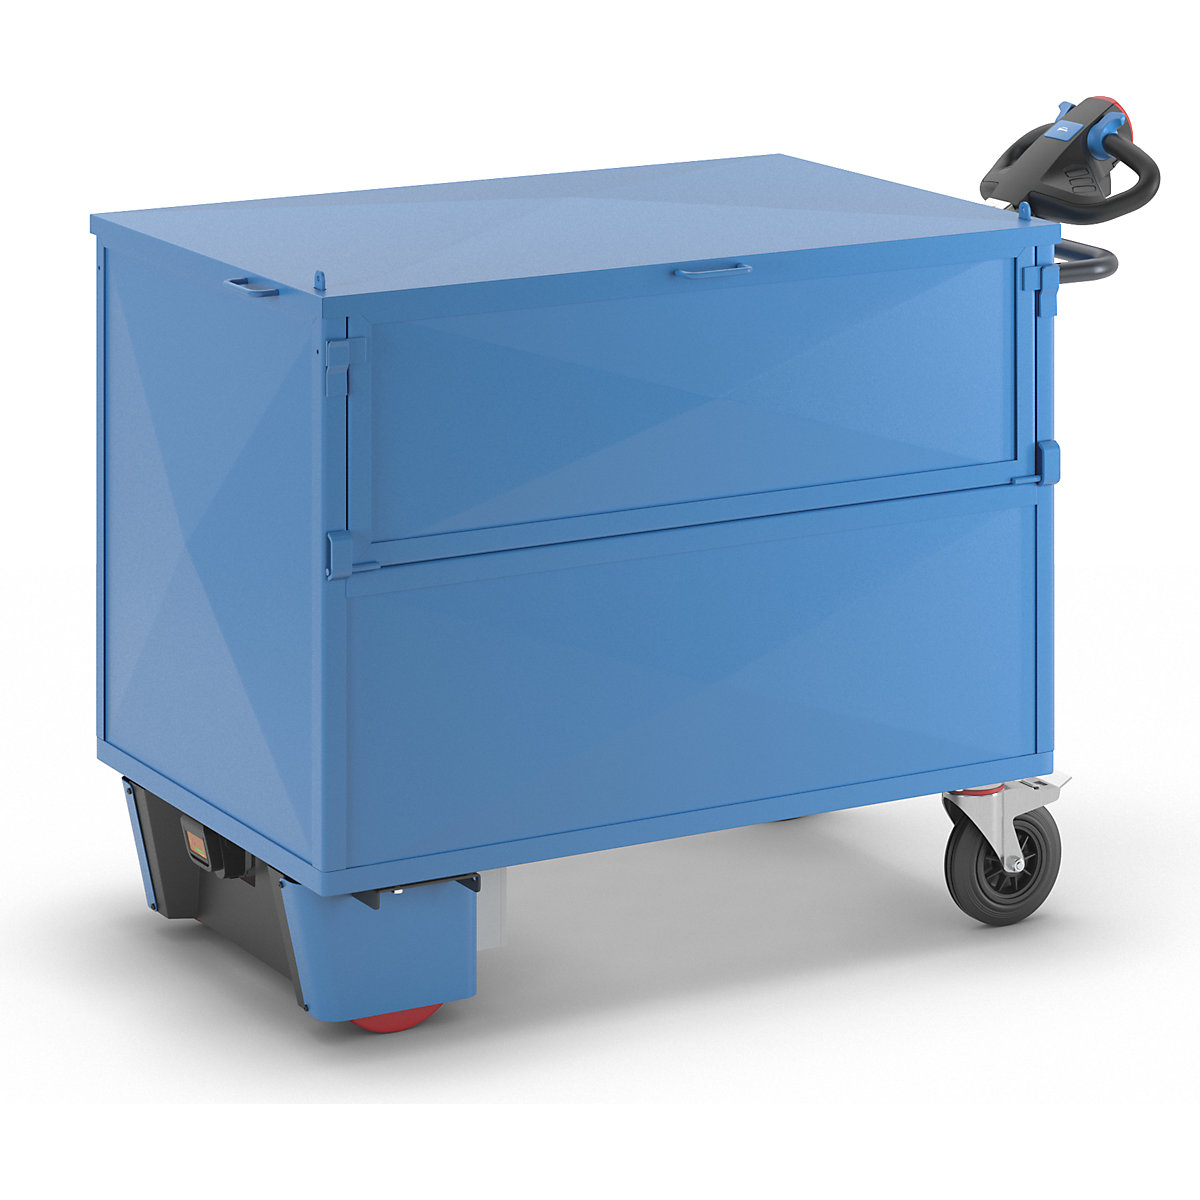 Box truck with electric drive – eurokraft pro, panels made of sheet steel, with lid, LxWxH 1630 x 850 x 1200 mm-14